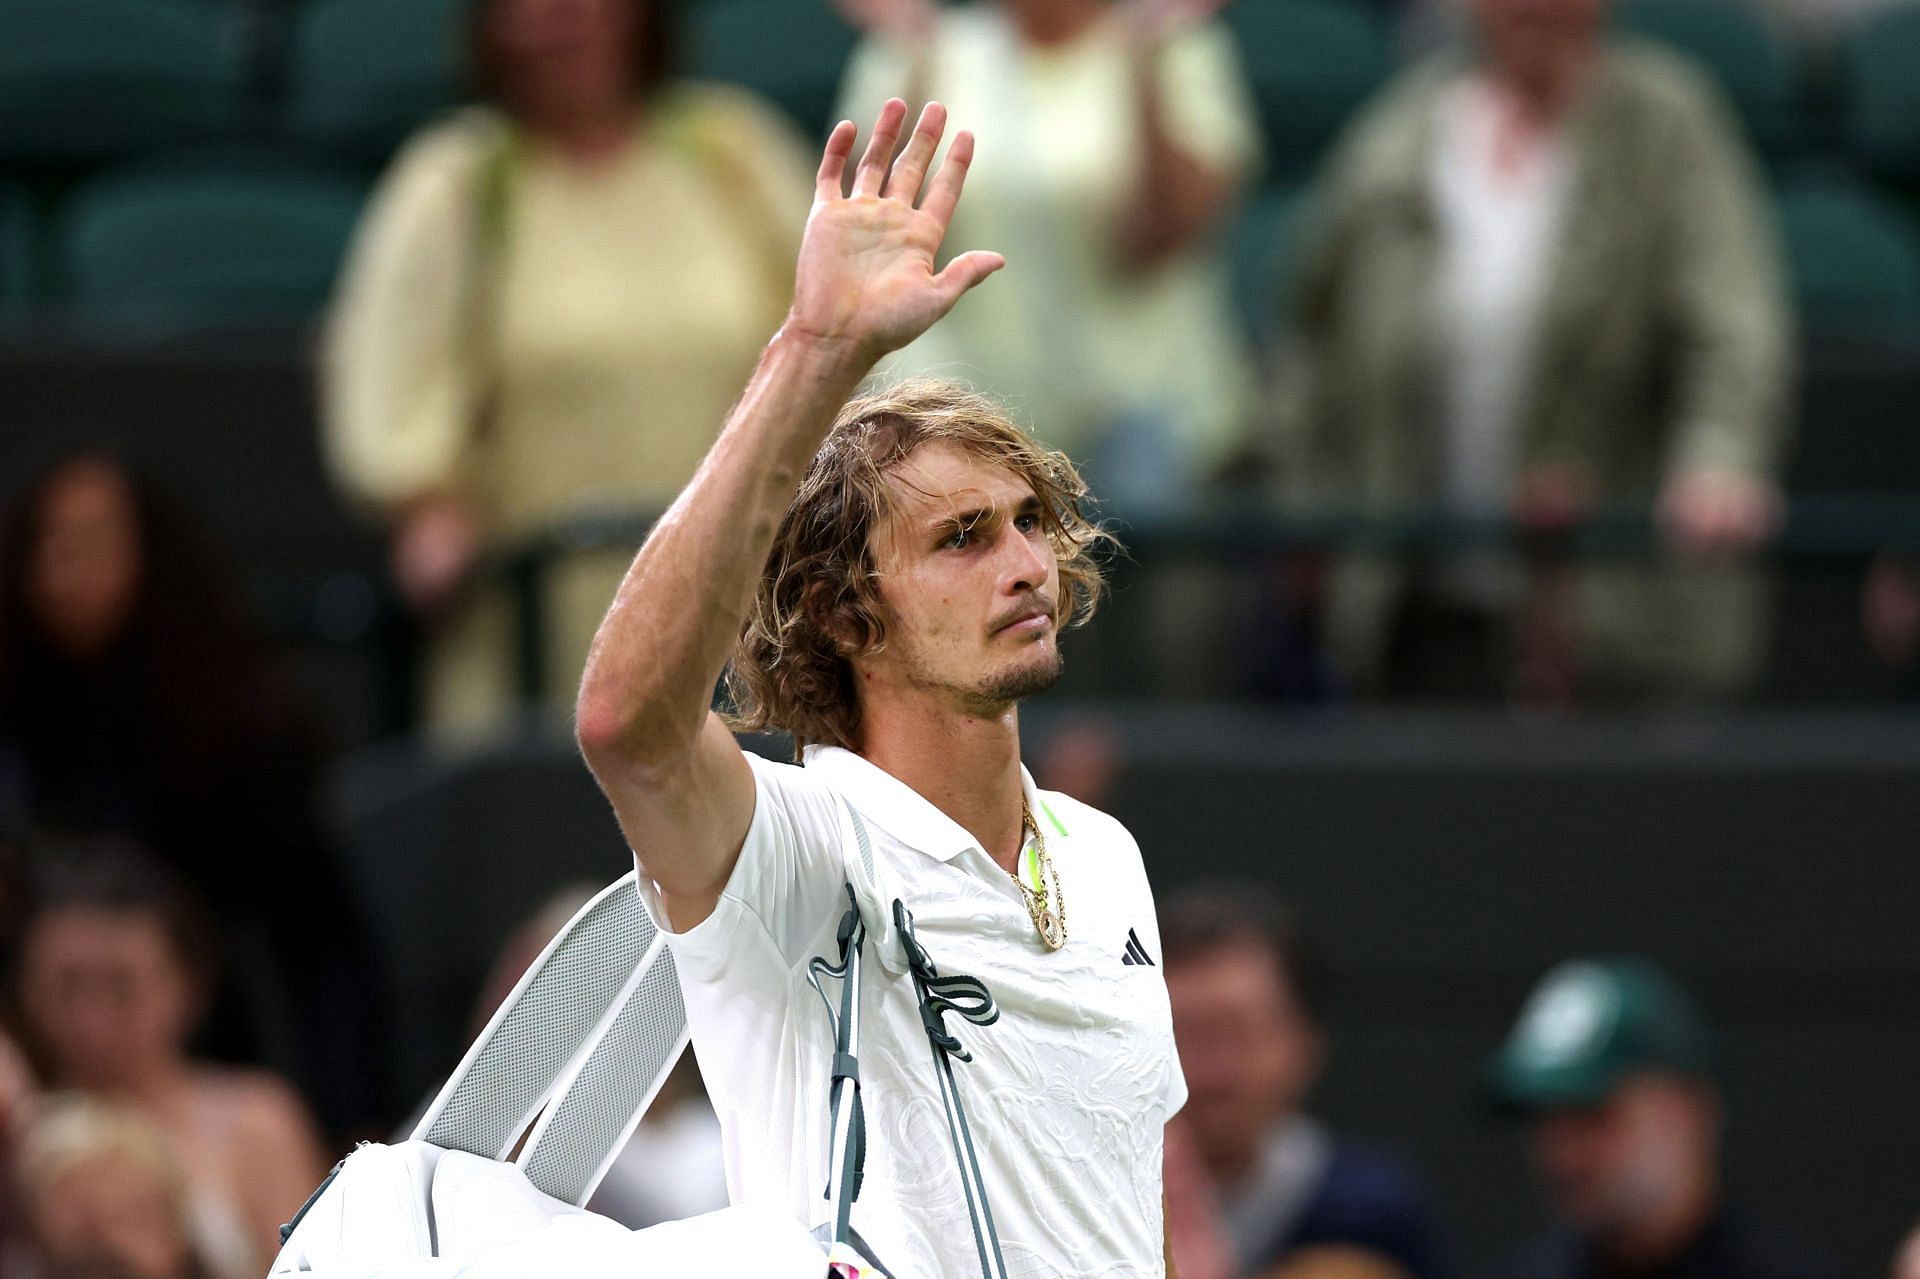 Alexander Zverev crashed out of the 2023 Wimbledon